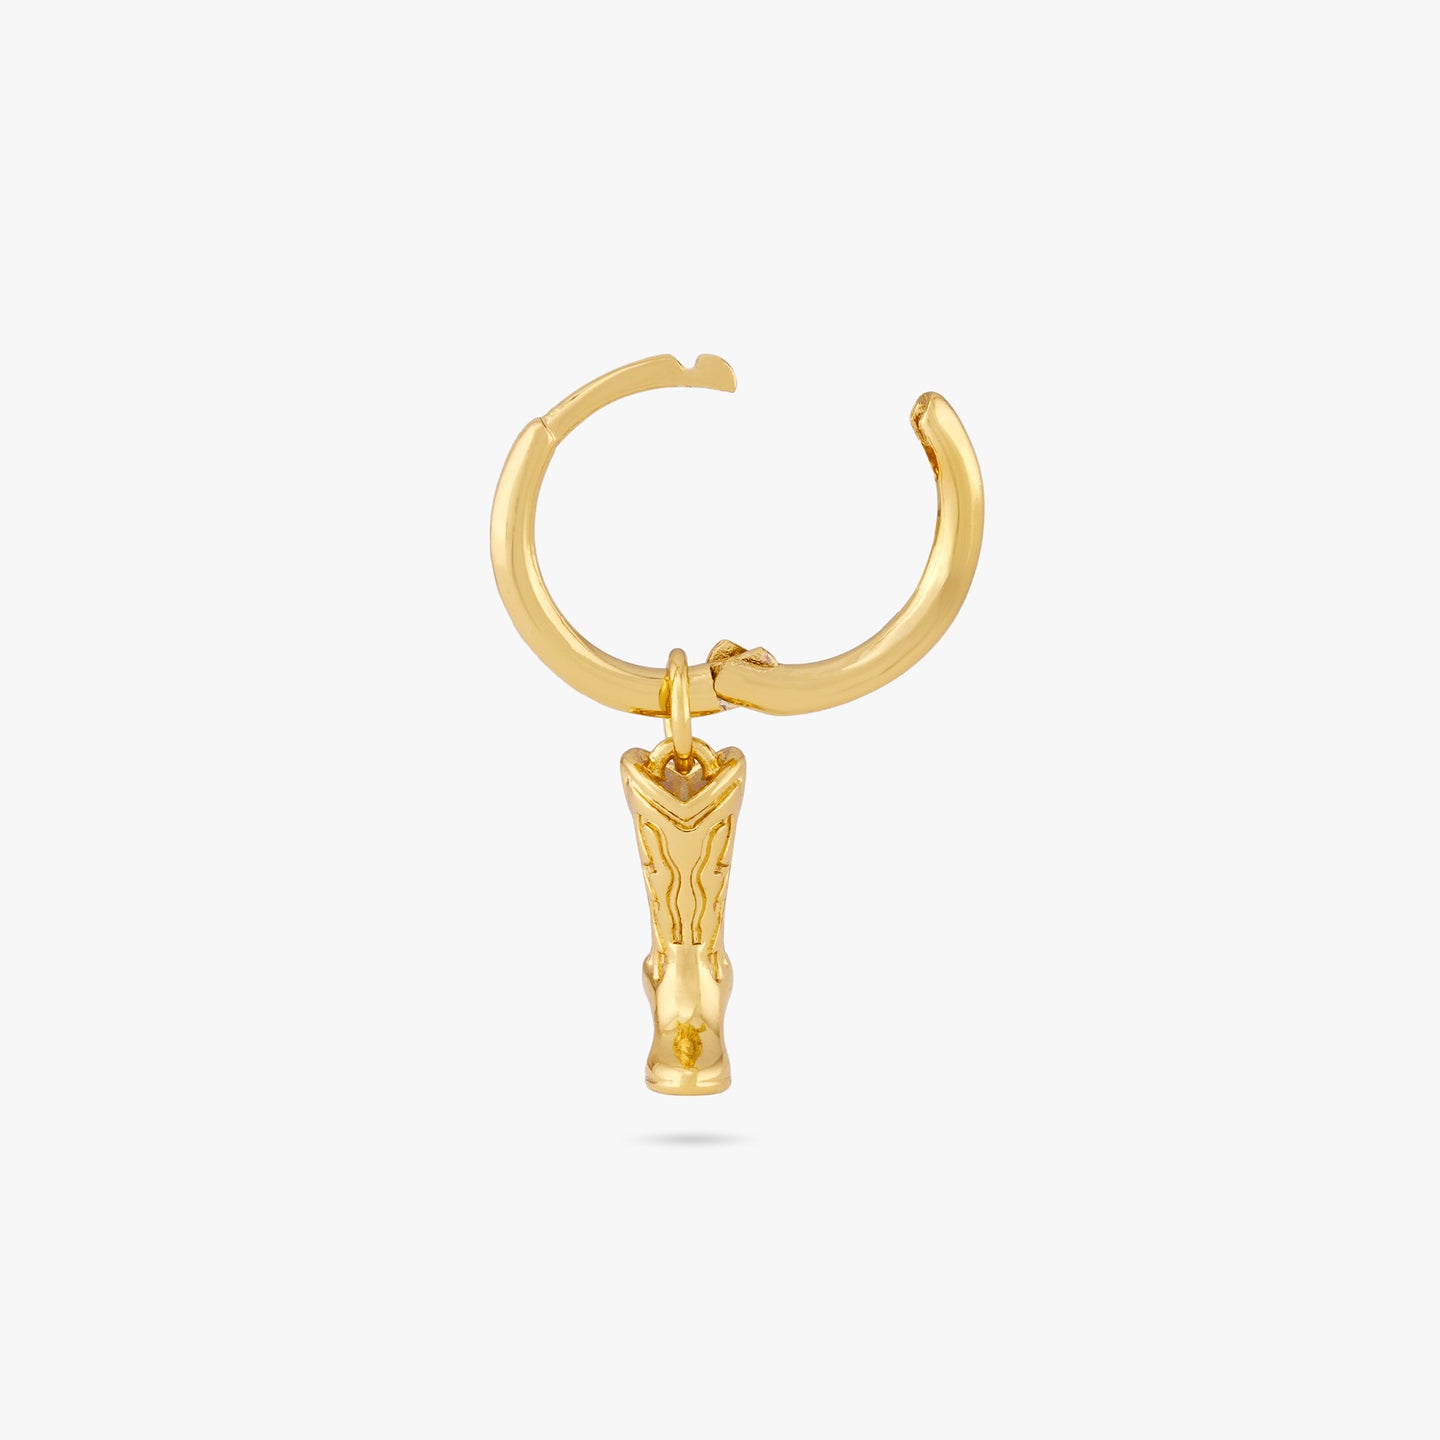 This is a gold cowboy boot charm dangling from a gold huggie and the clasp is undone color:null|gold